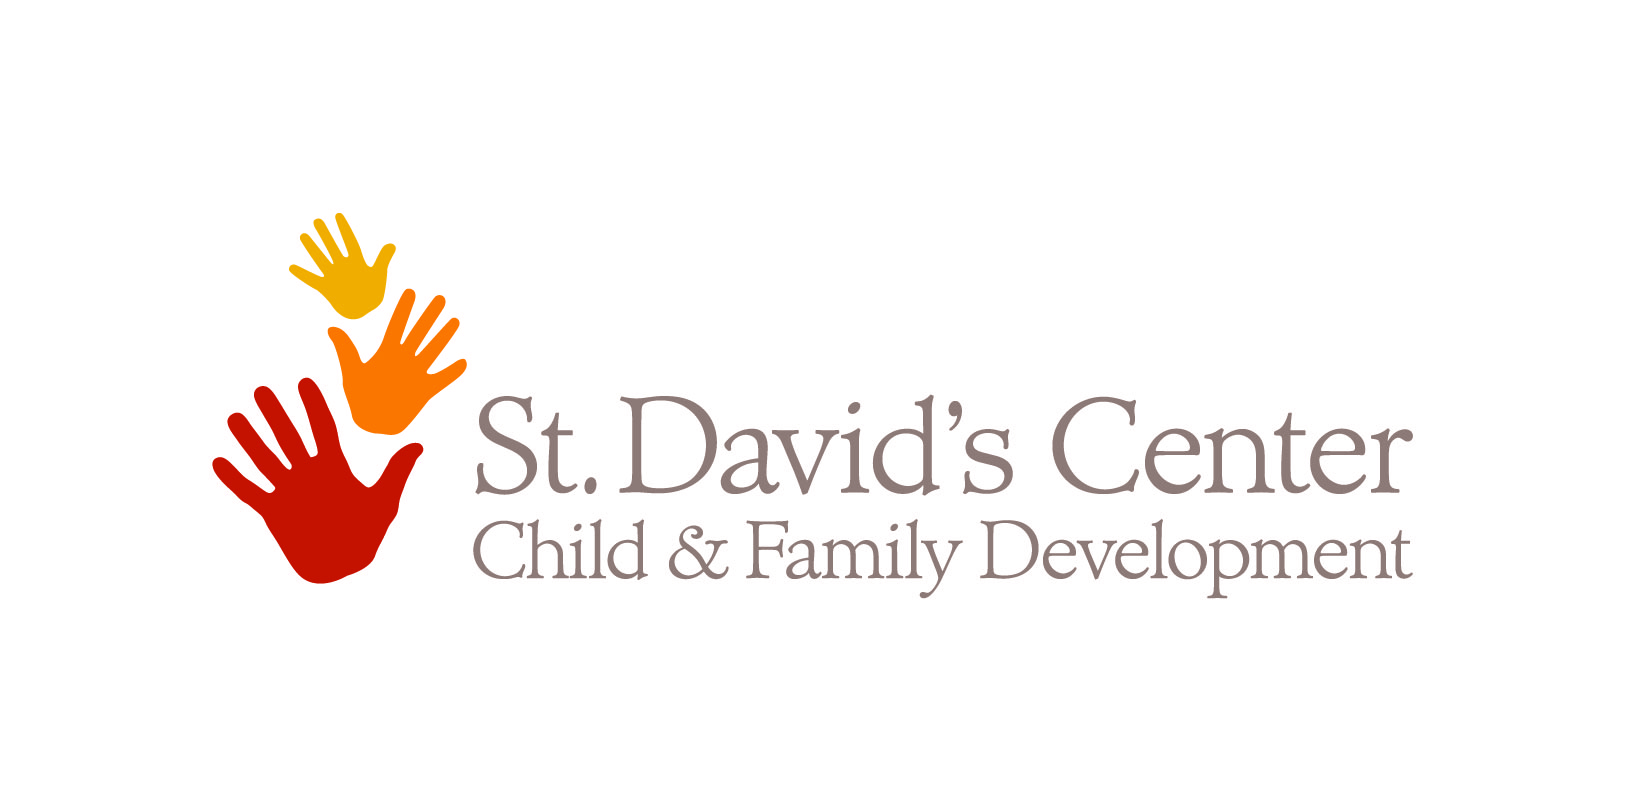 The Harman Center for Child & Family Wellbeing